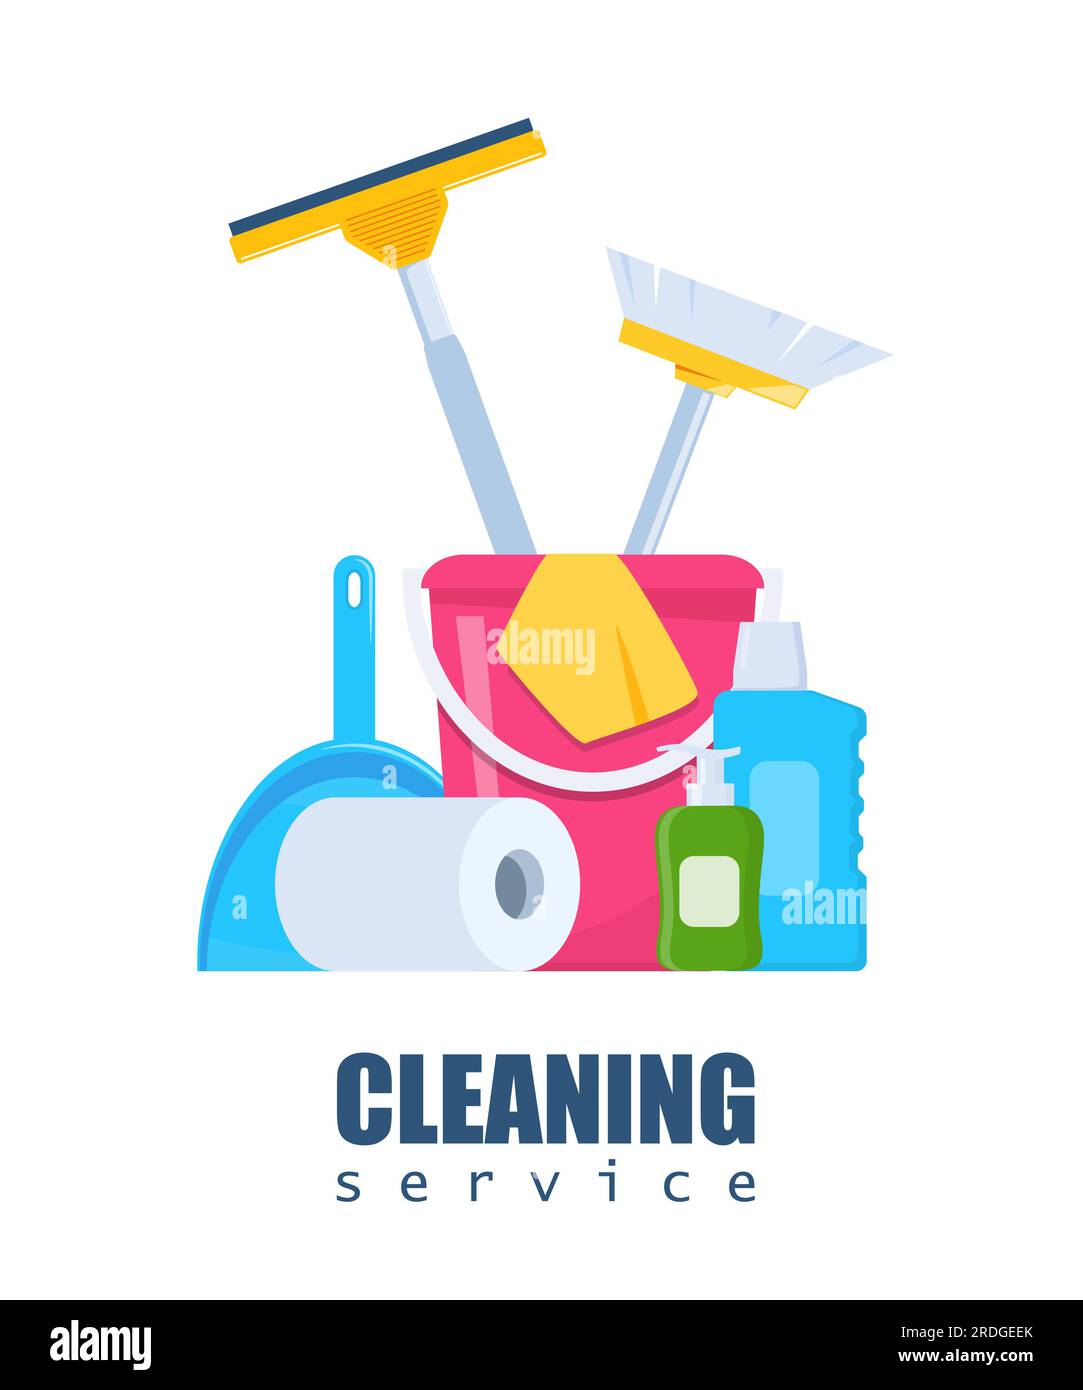 https://c8.alamy.com/comp/2RDGEEK/cleaning-service-and-household-supplies-design-concept-for-web-banner-infographic-poster-detergent-and-disinfectant-products-with-bucket-mop-det-2RDGEEK.jpg